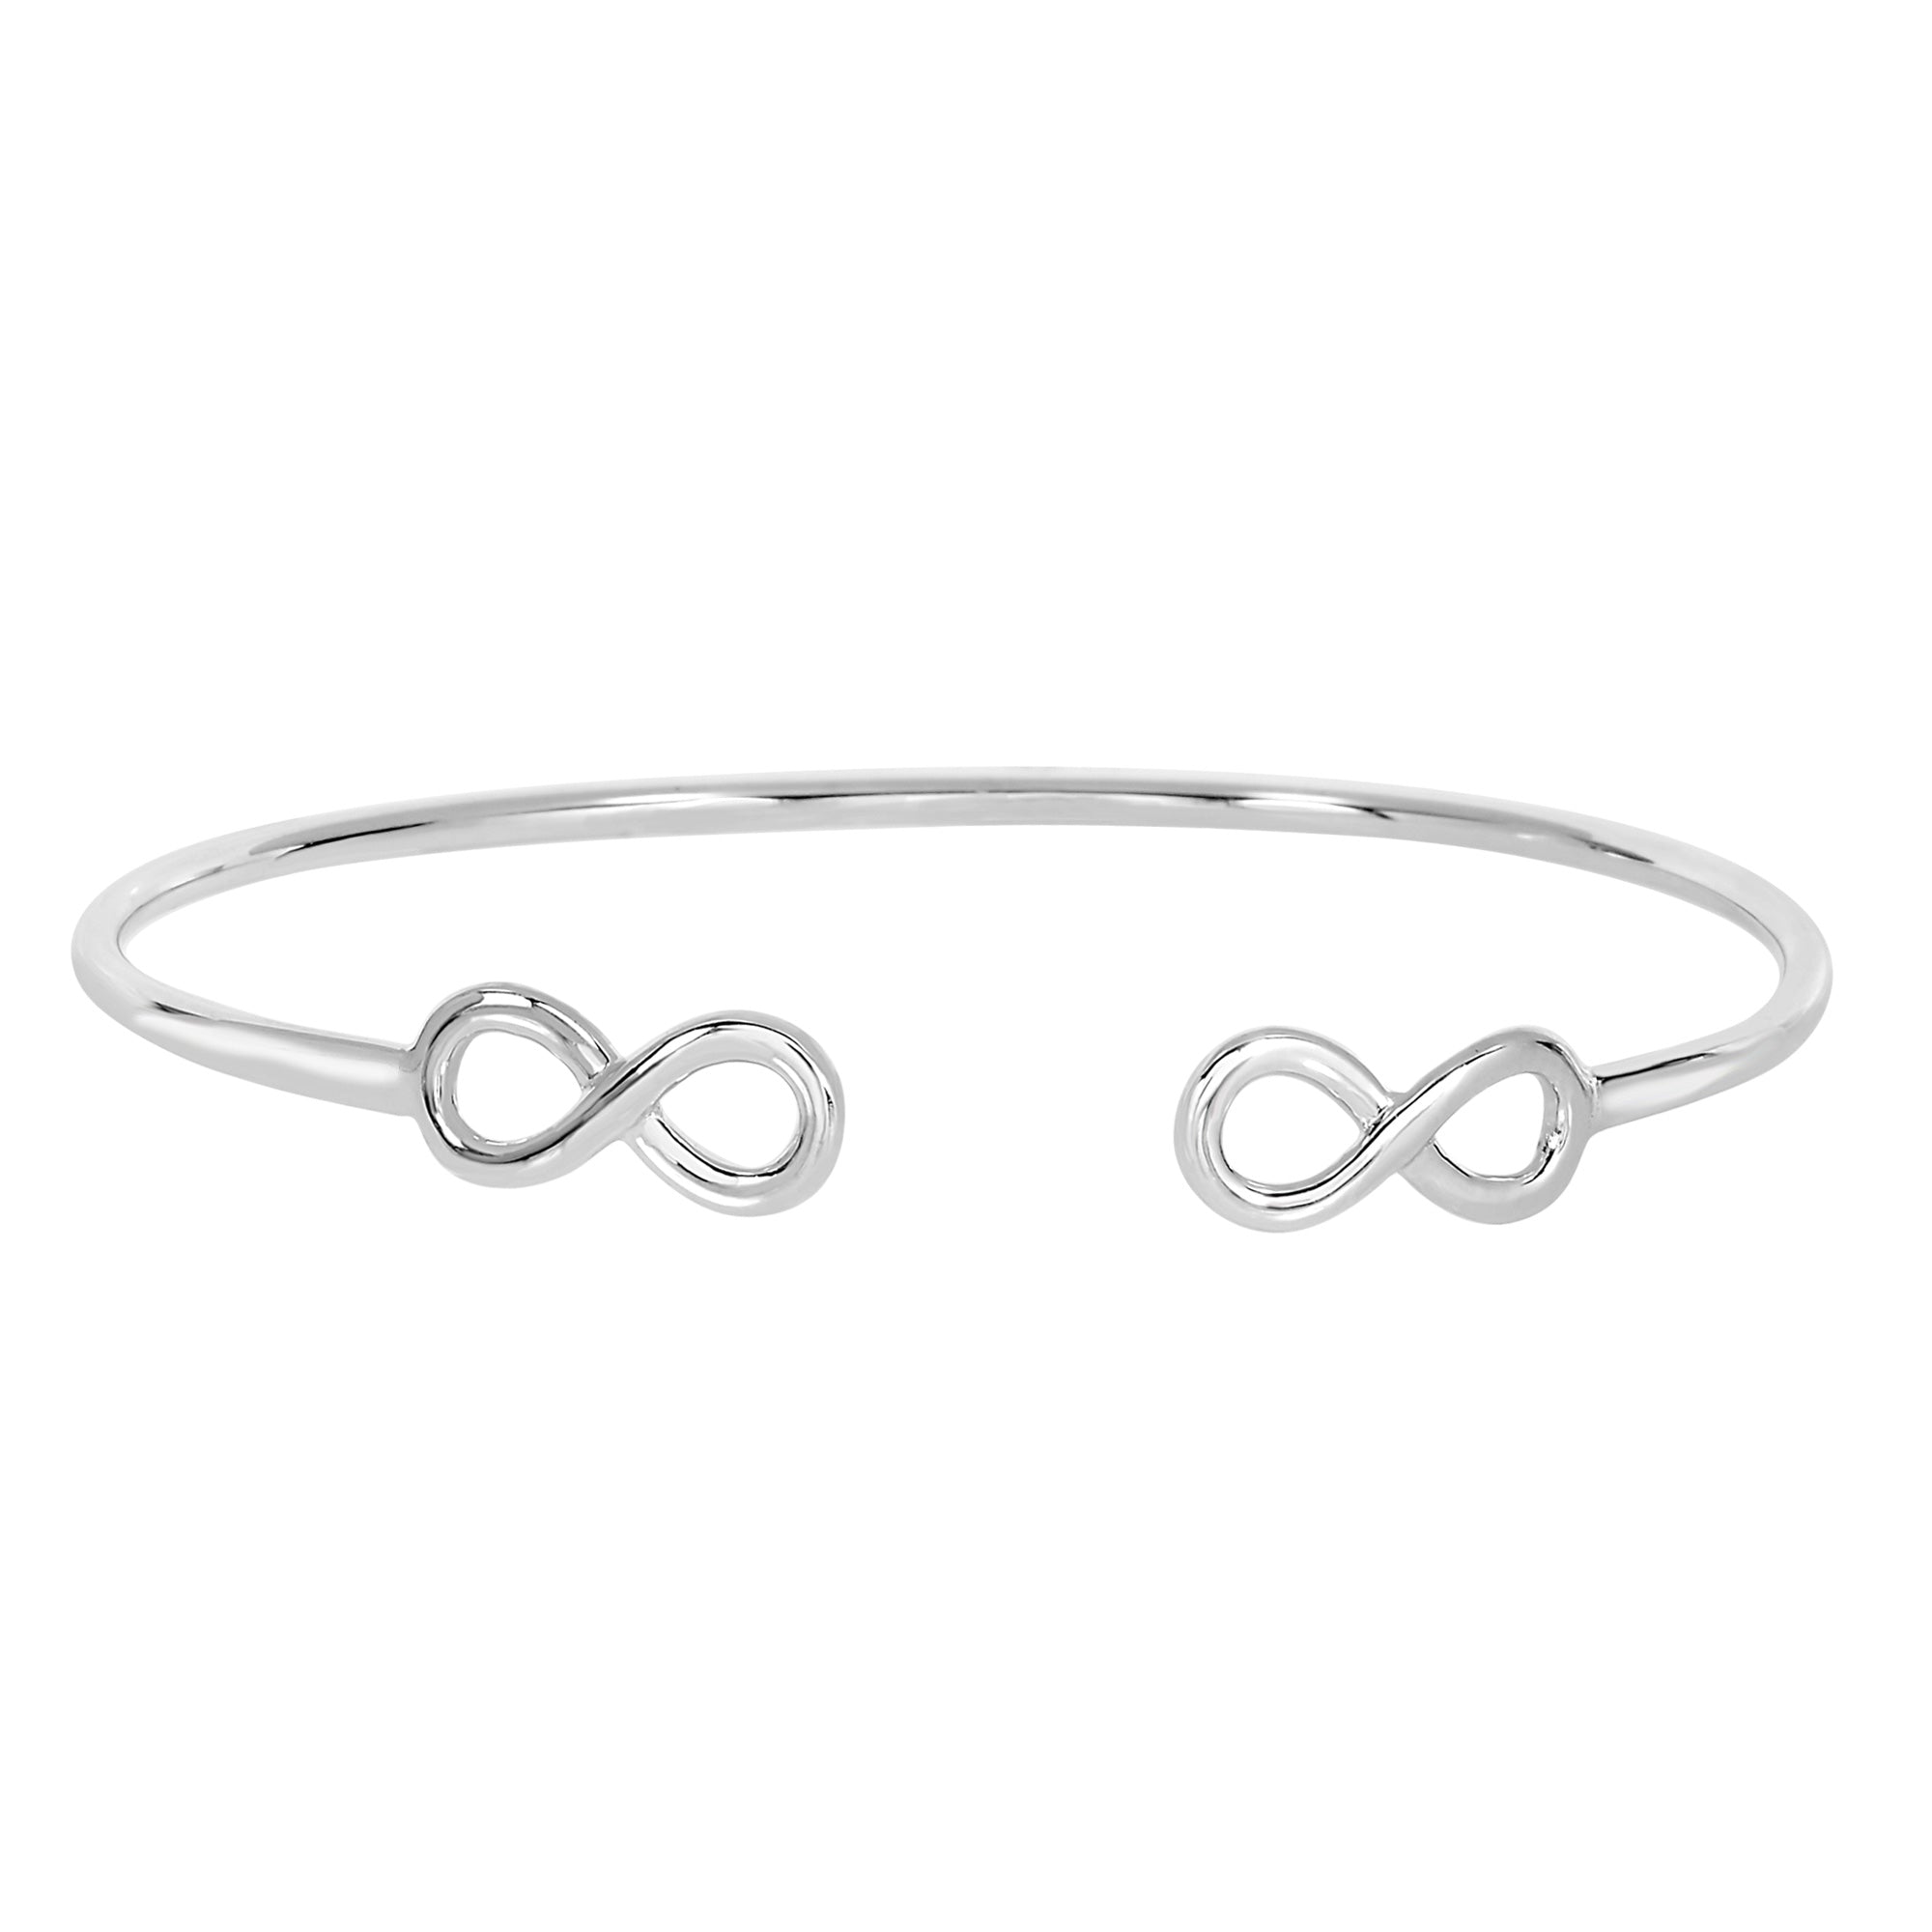 Sterling Silver Double Infinity Ends Bracelet Cuff fine designer jewelry for men and women